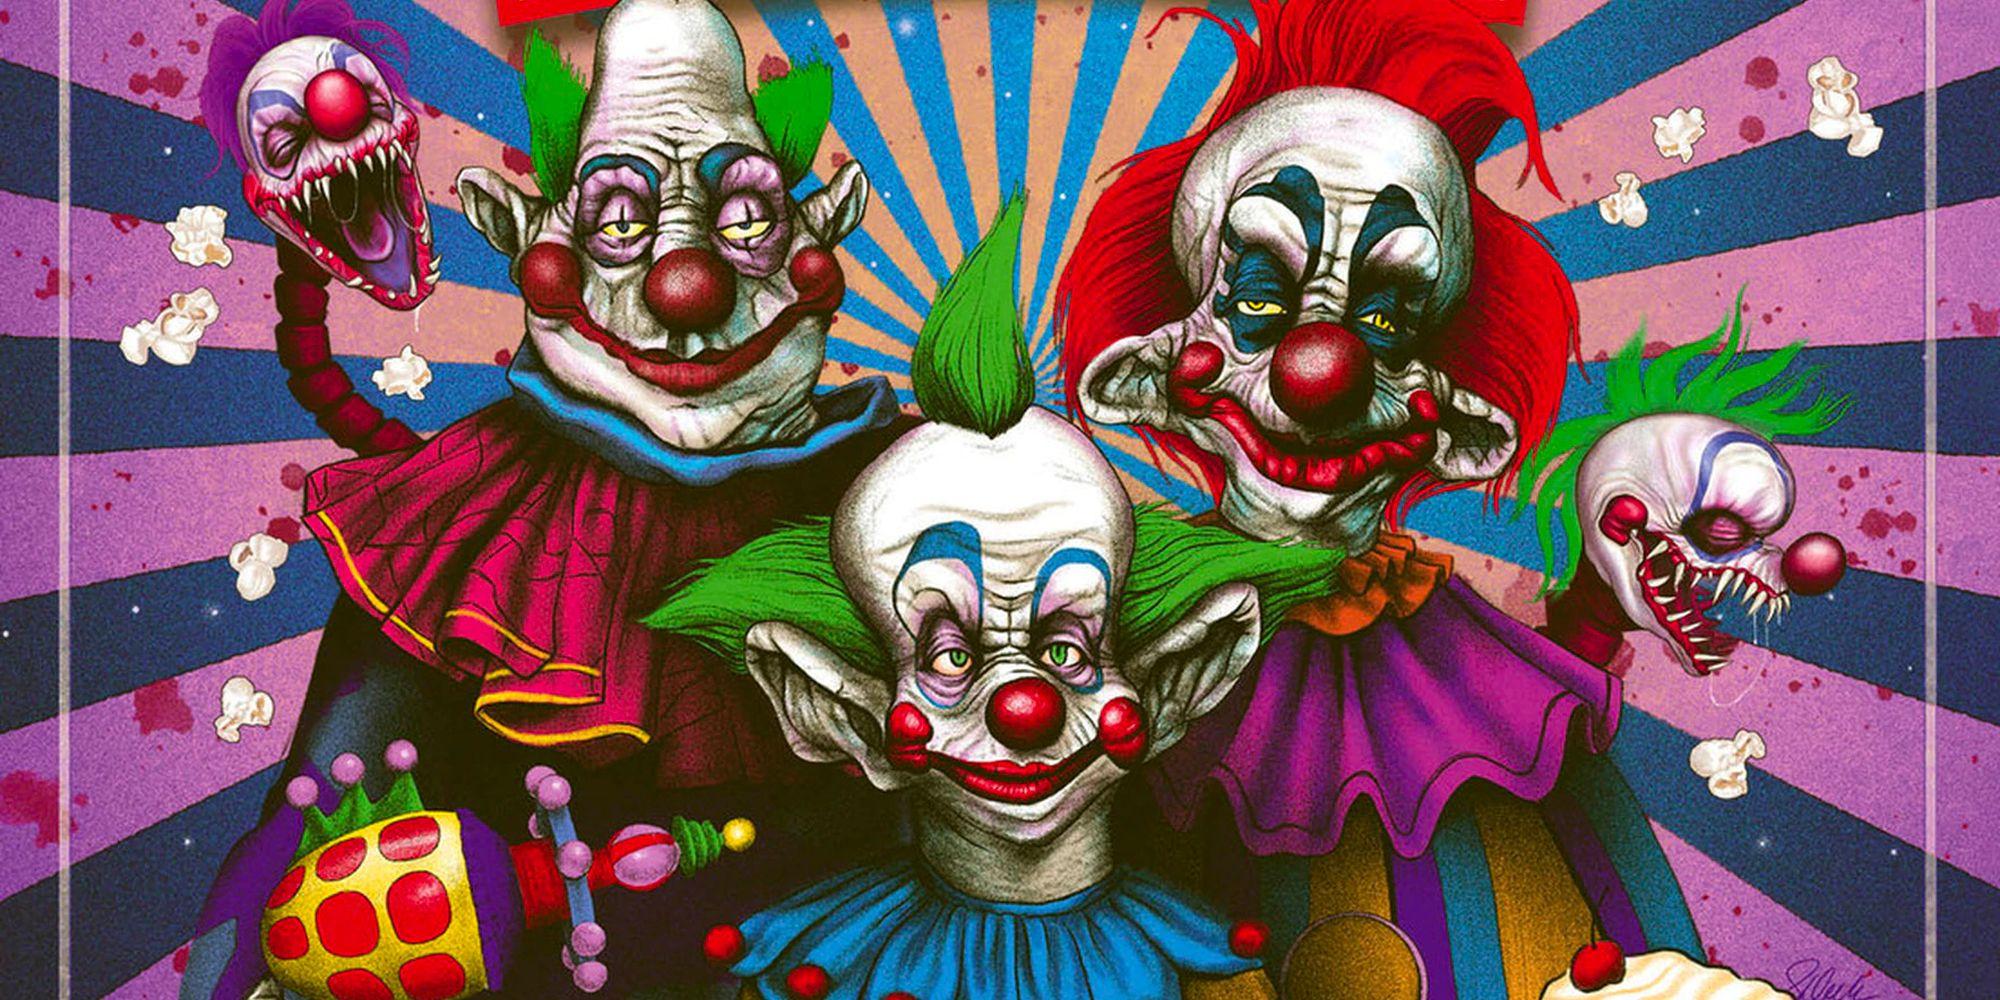 Killer Klowns from Outer Space Wallpapers - Top Free Killer Klowns from